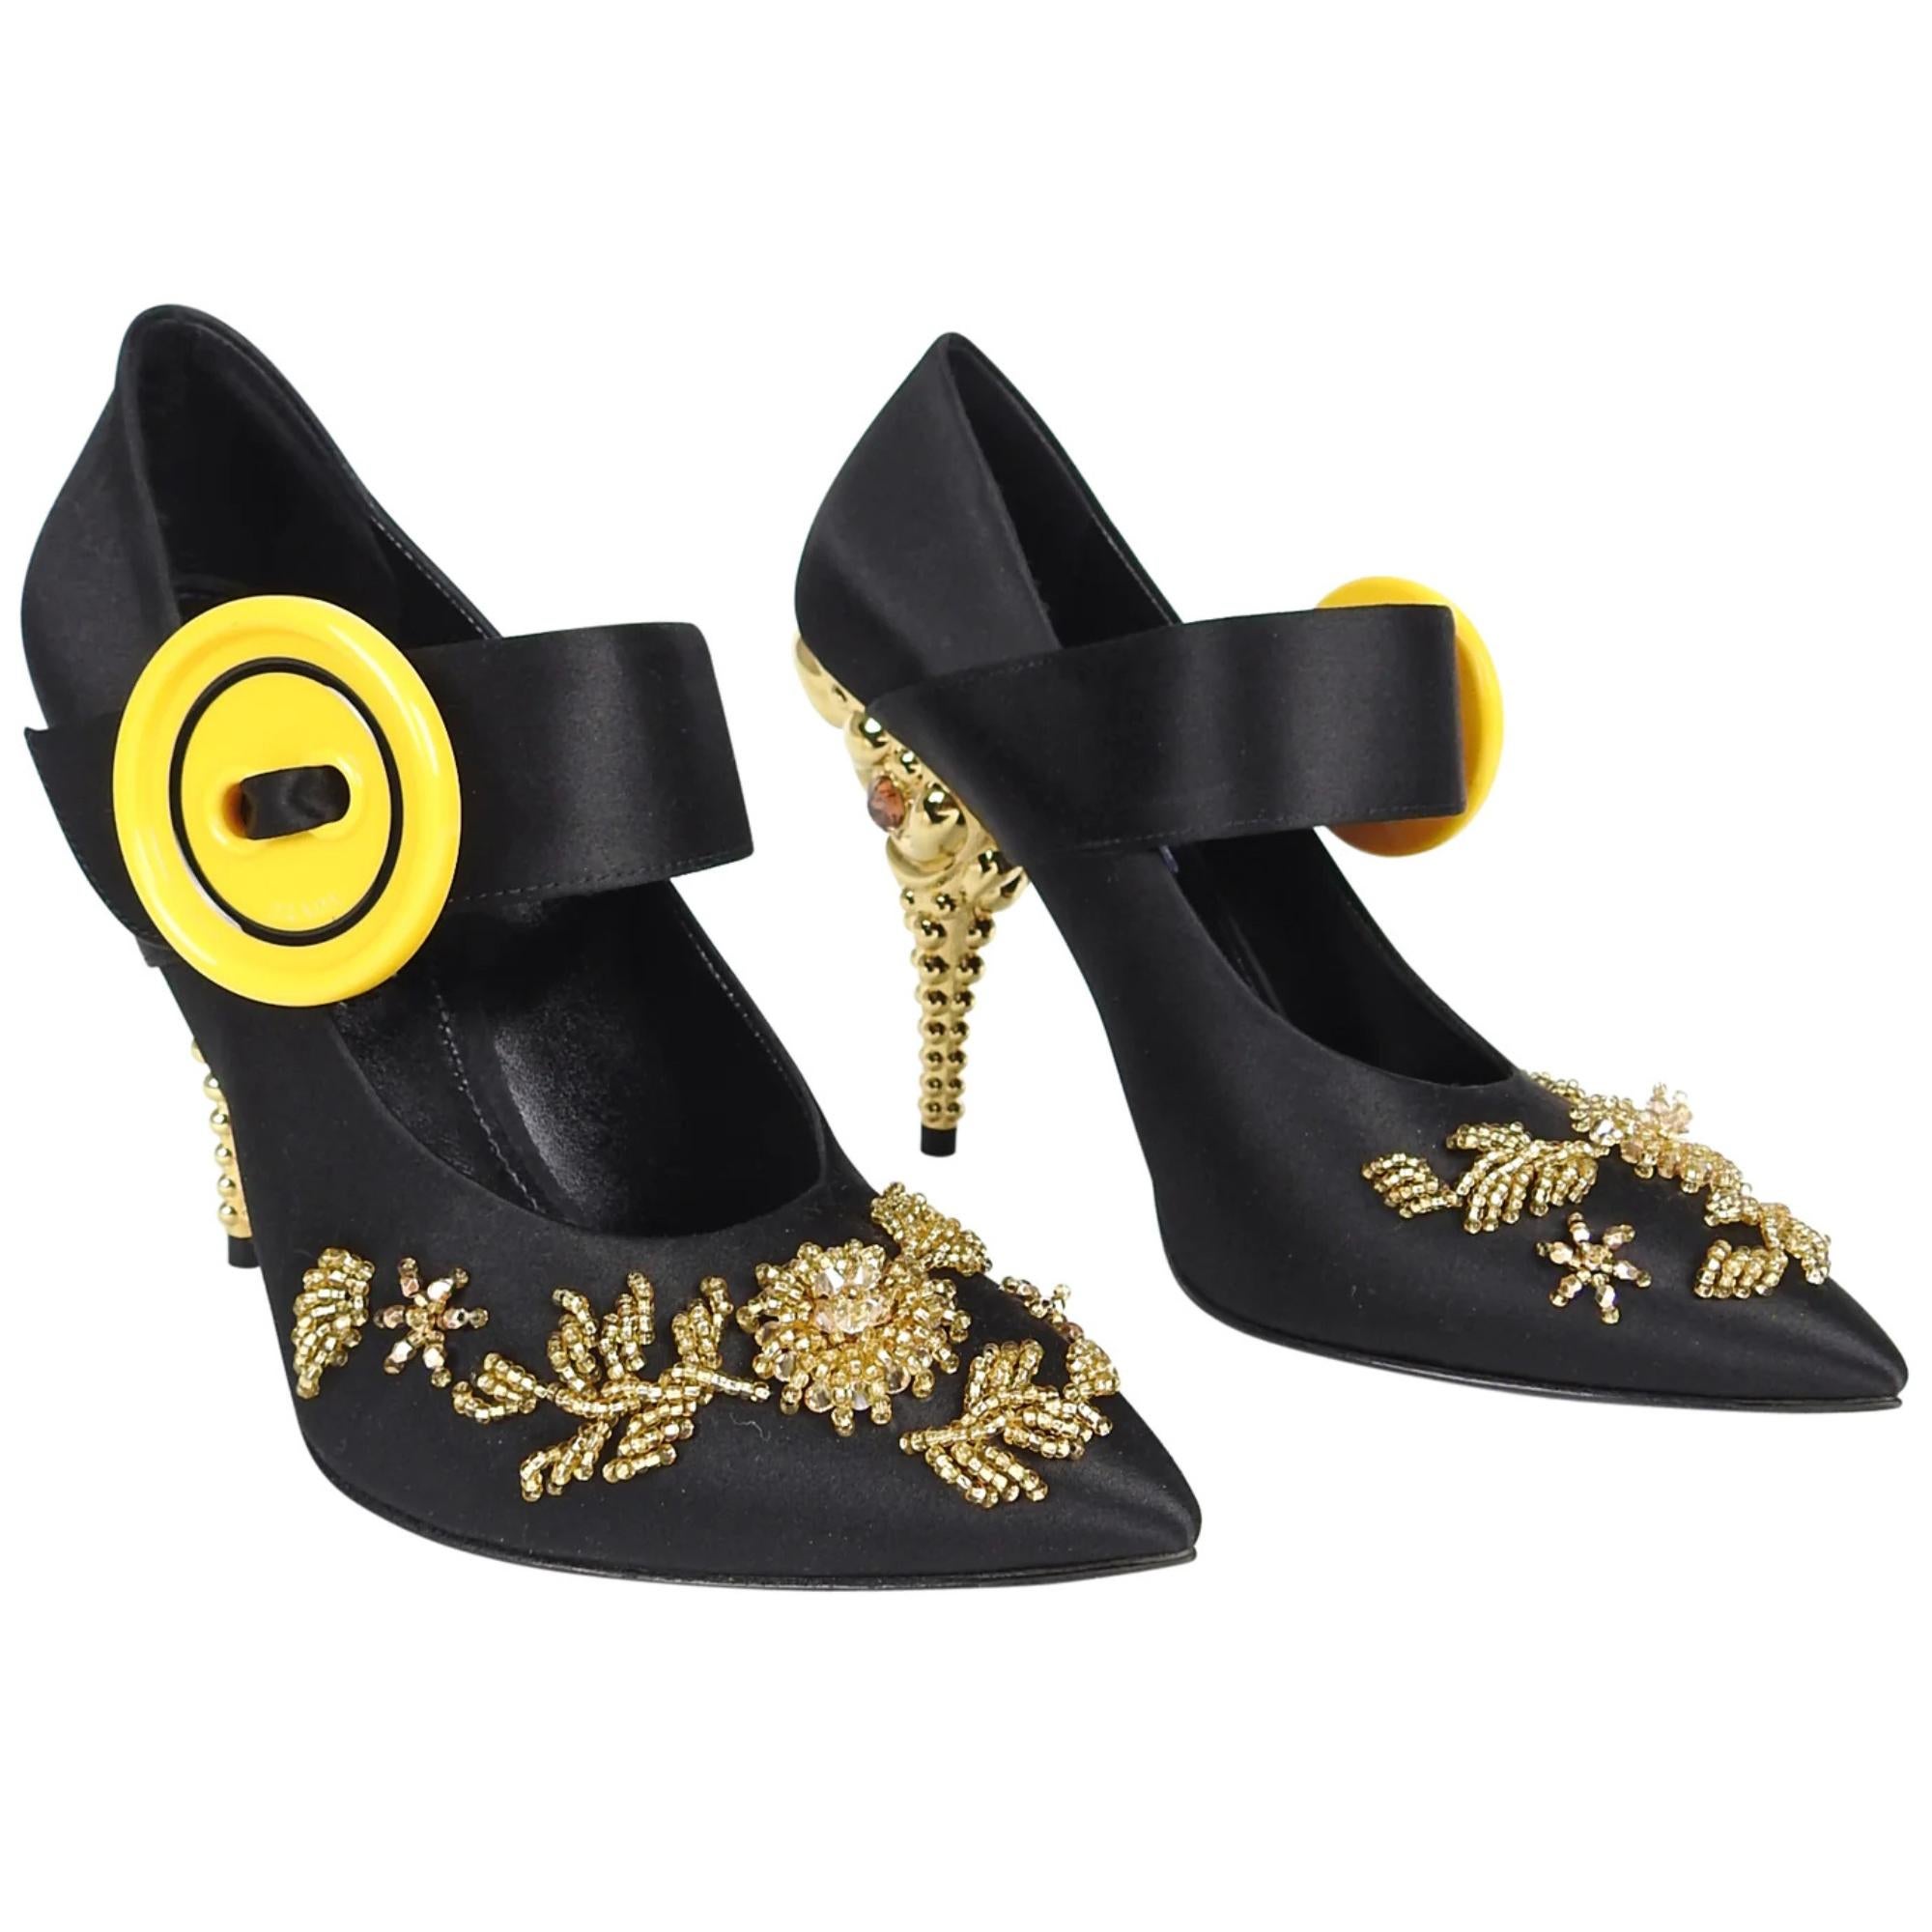 The pumps are constructed of black satin and embellished with gold beads with a bright yellow button. The pumps feature black satin, gold jewelled heel, yellow button at strap, and a sculpted gold metal heel. Pointed toe with beaded details. 110 mm